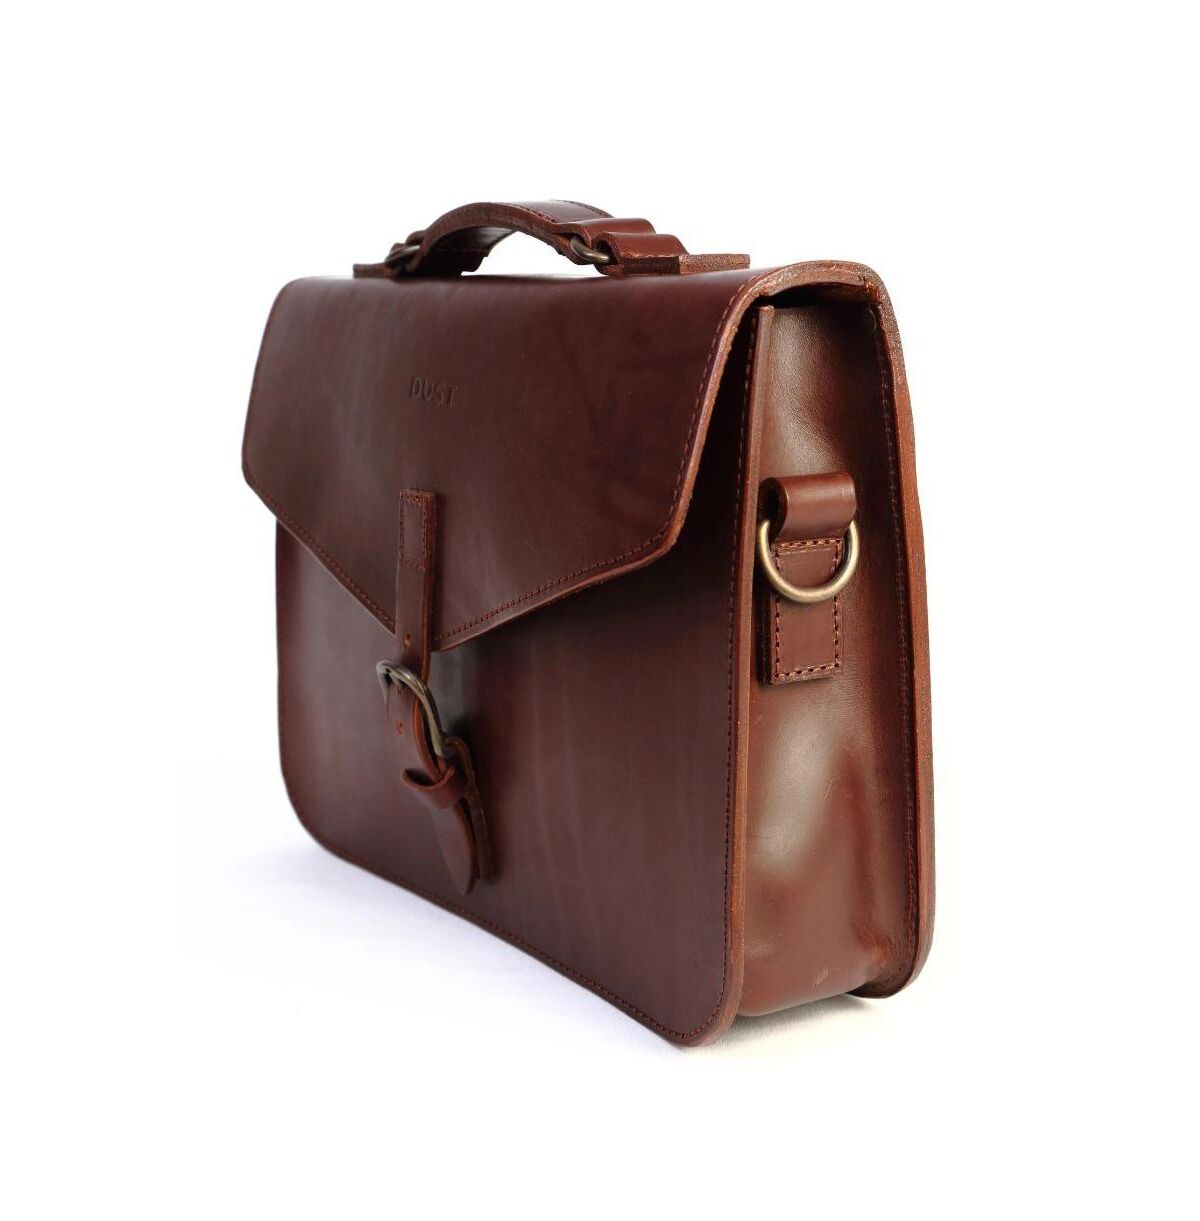 The Dust Company Leather Briefcase - Dark Brown